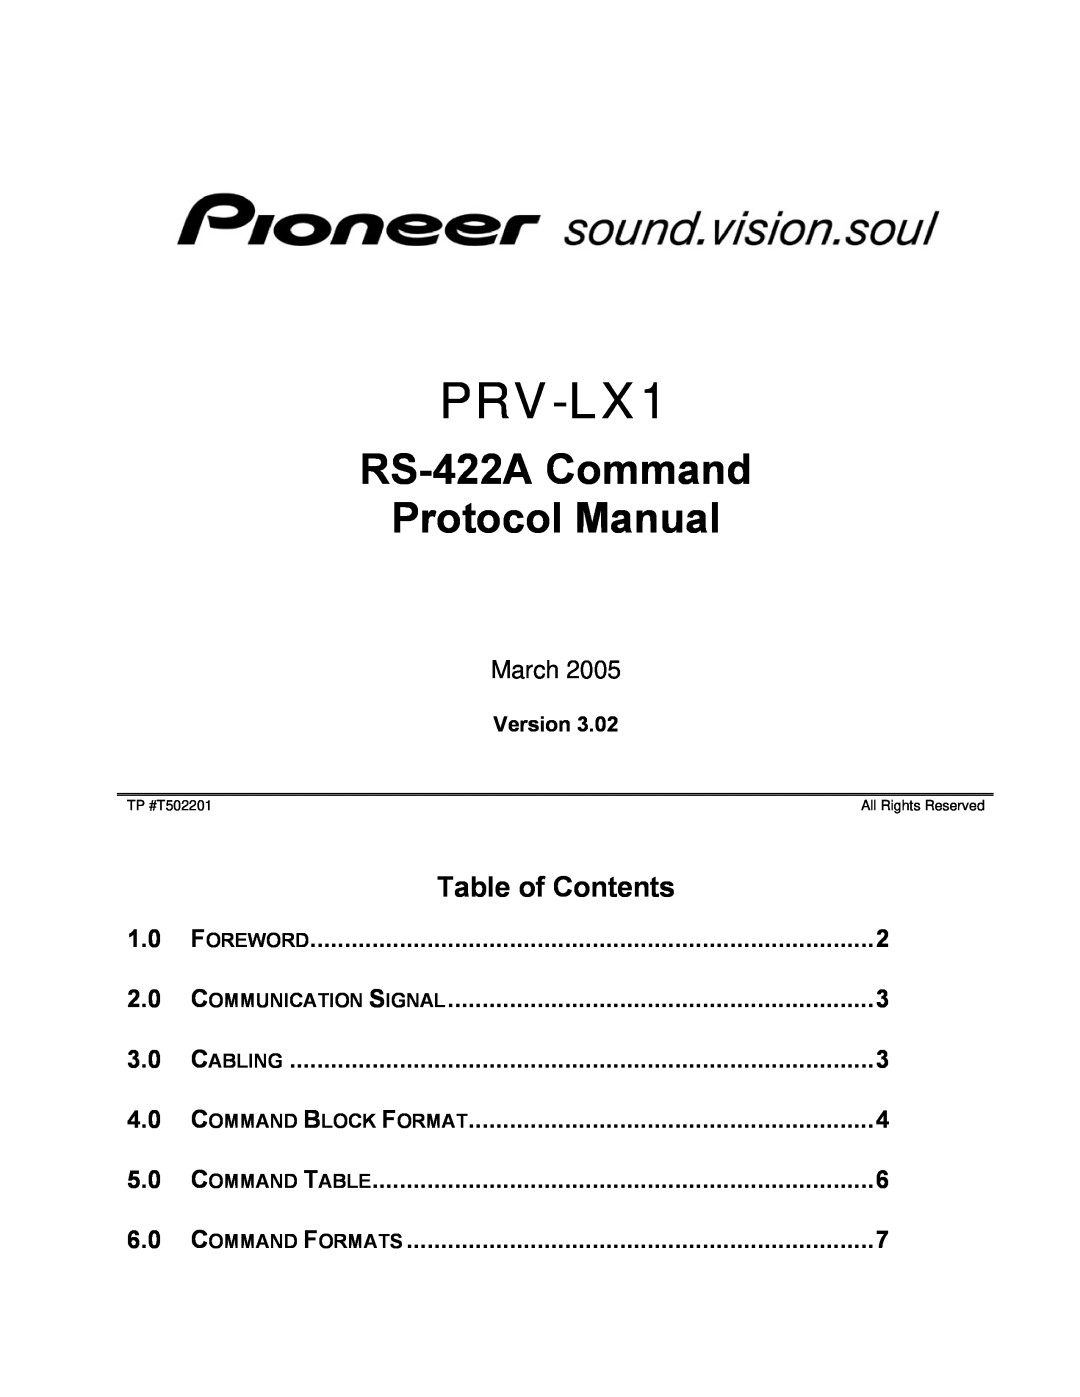 Pioneer manual FOR THE PRV-LX1RECORDER, Guide To Designing Menu Layouts, Using The Dvd Menu Makerapplication 